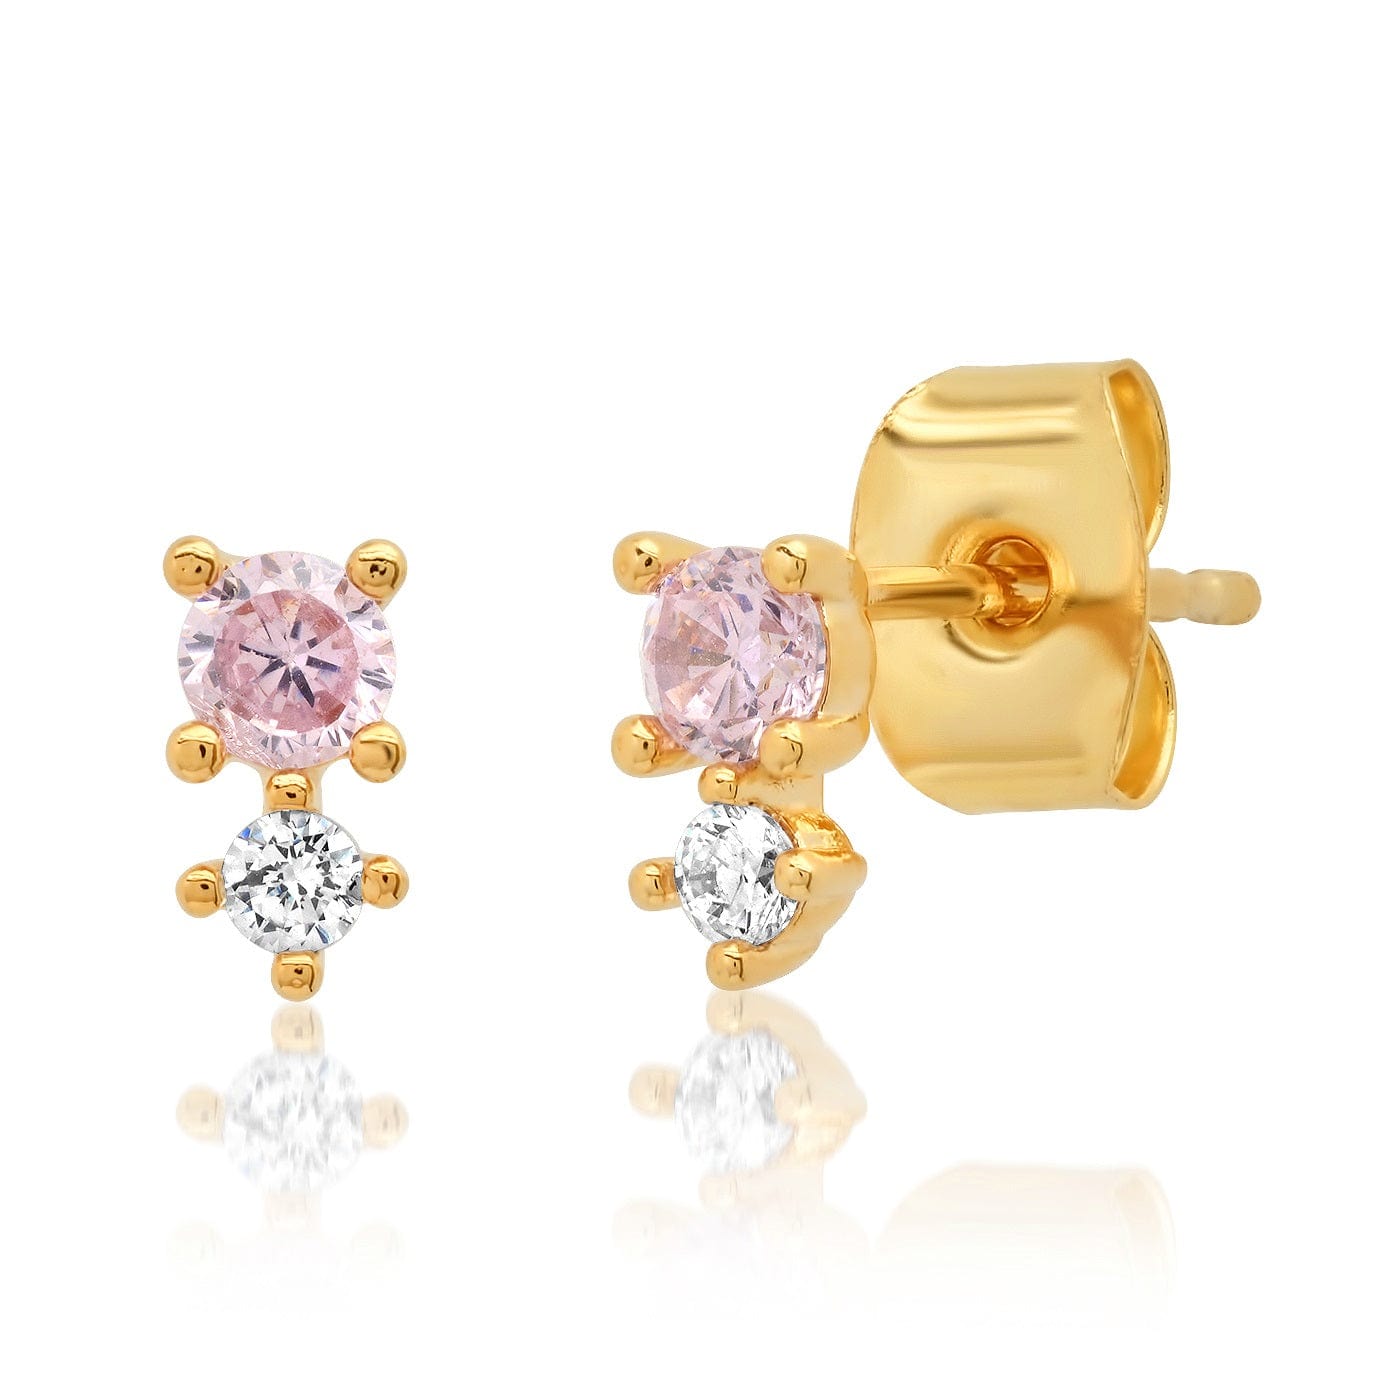 TAI JEWELRY Earrings Pink Cz And Colored Stone Studs